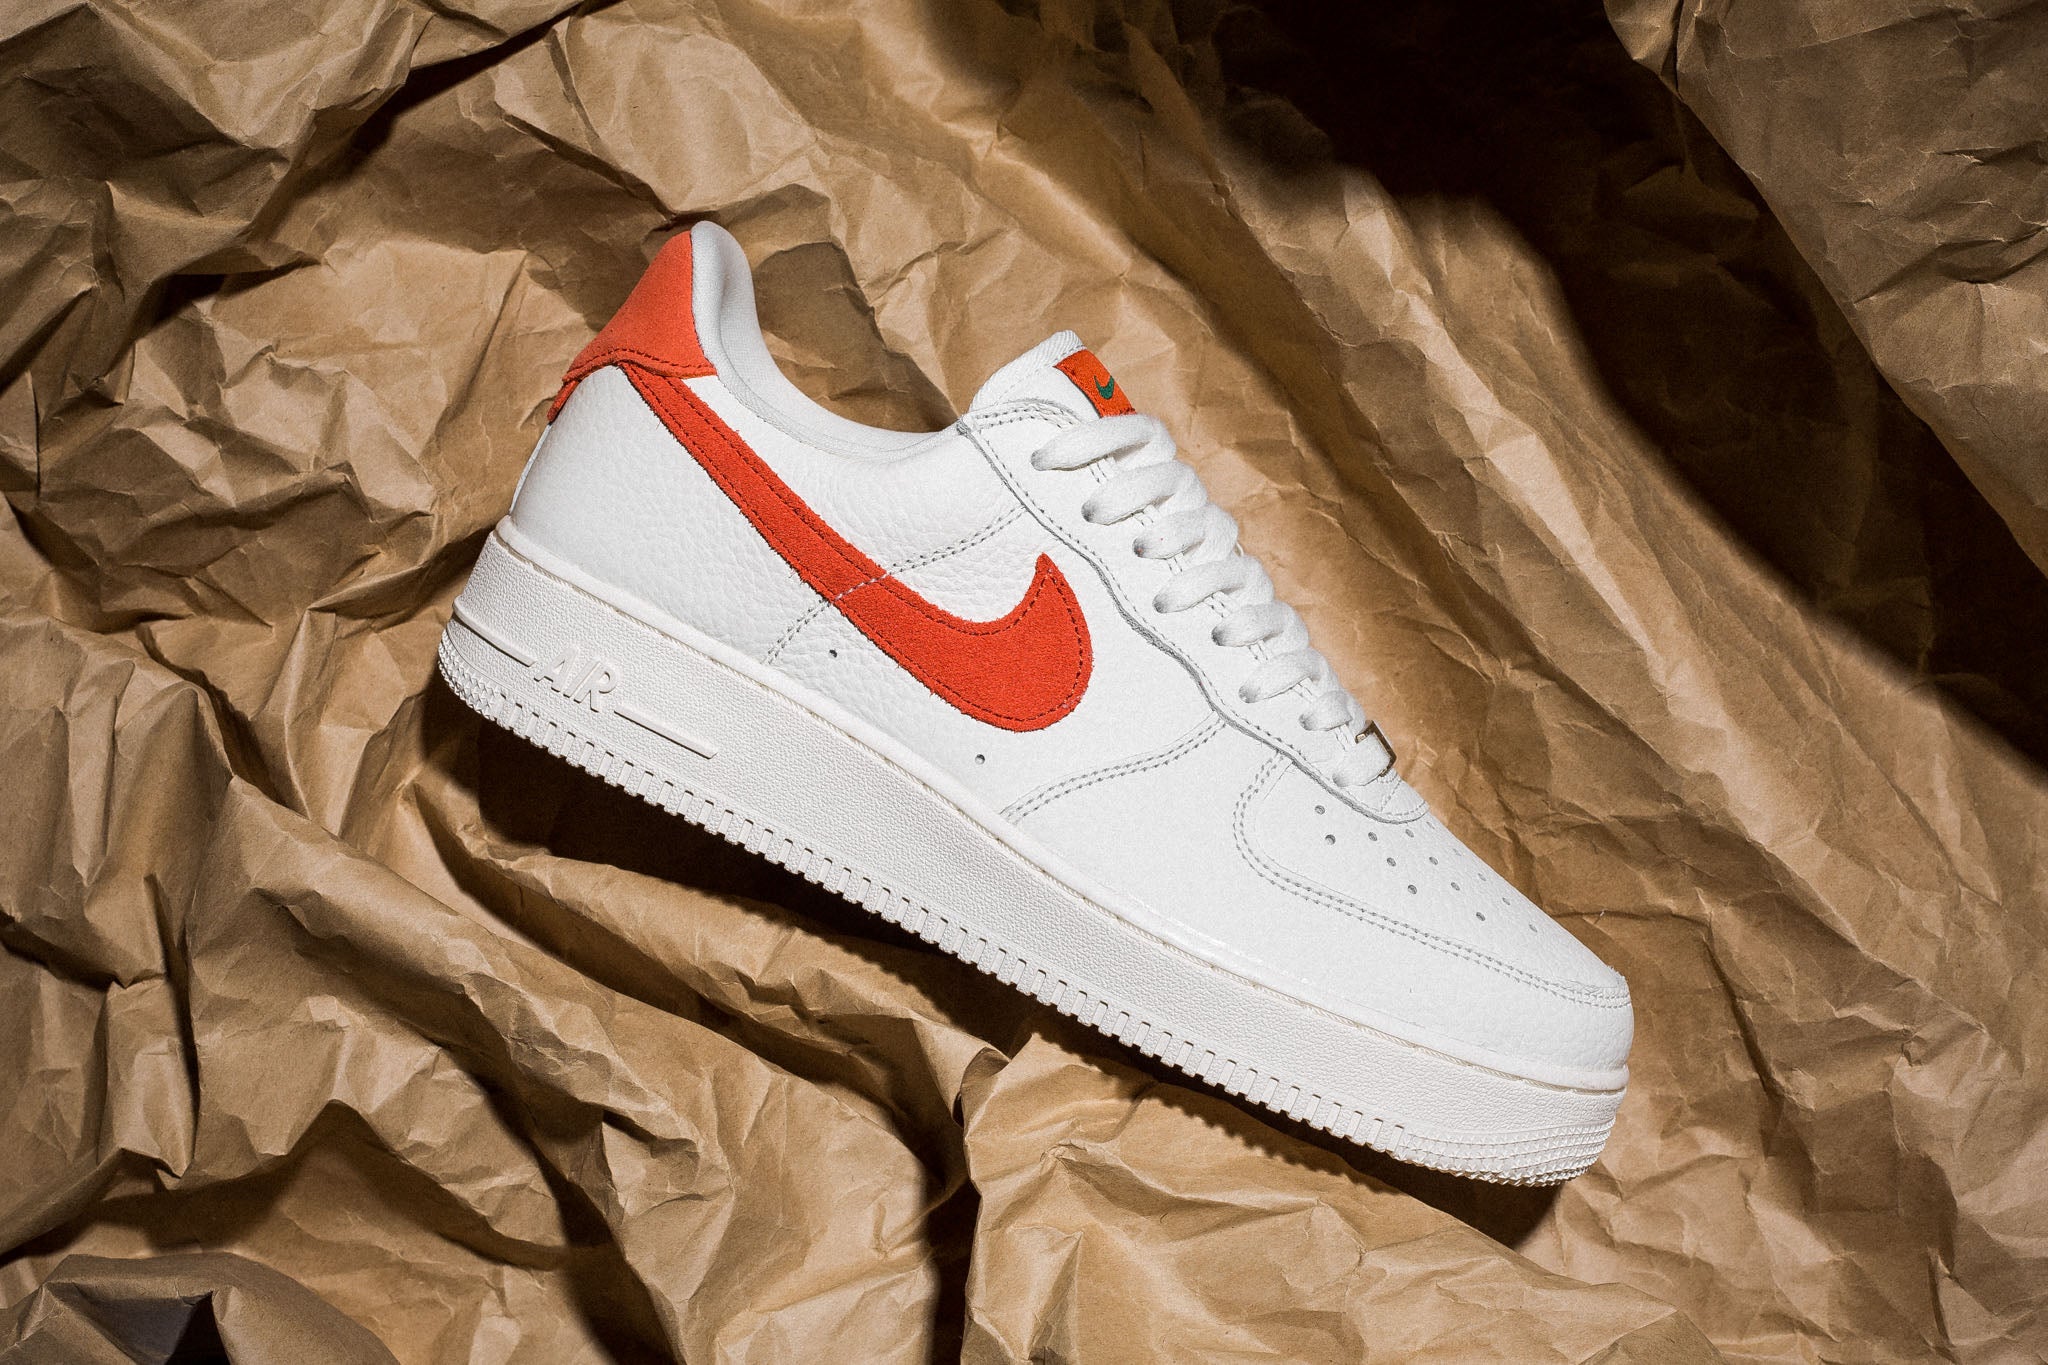 NIKE AIR FORCE 1 07' CRAFT MANTRA ORANGE REVIEW + ON FEET 